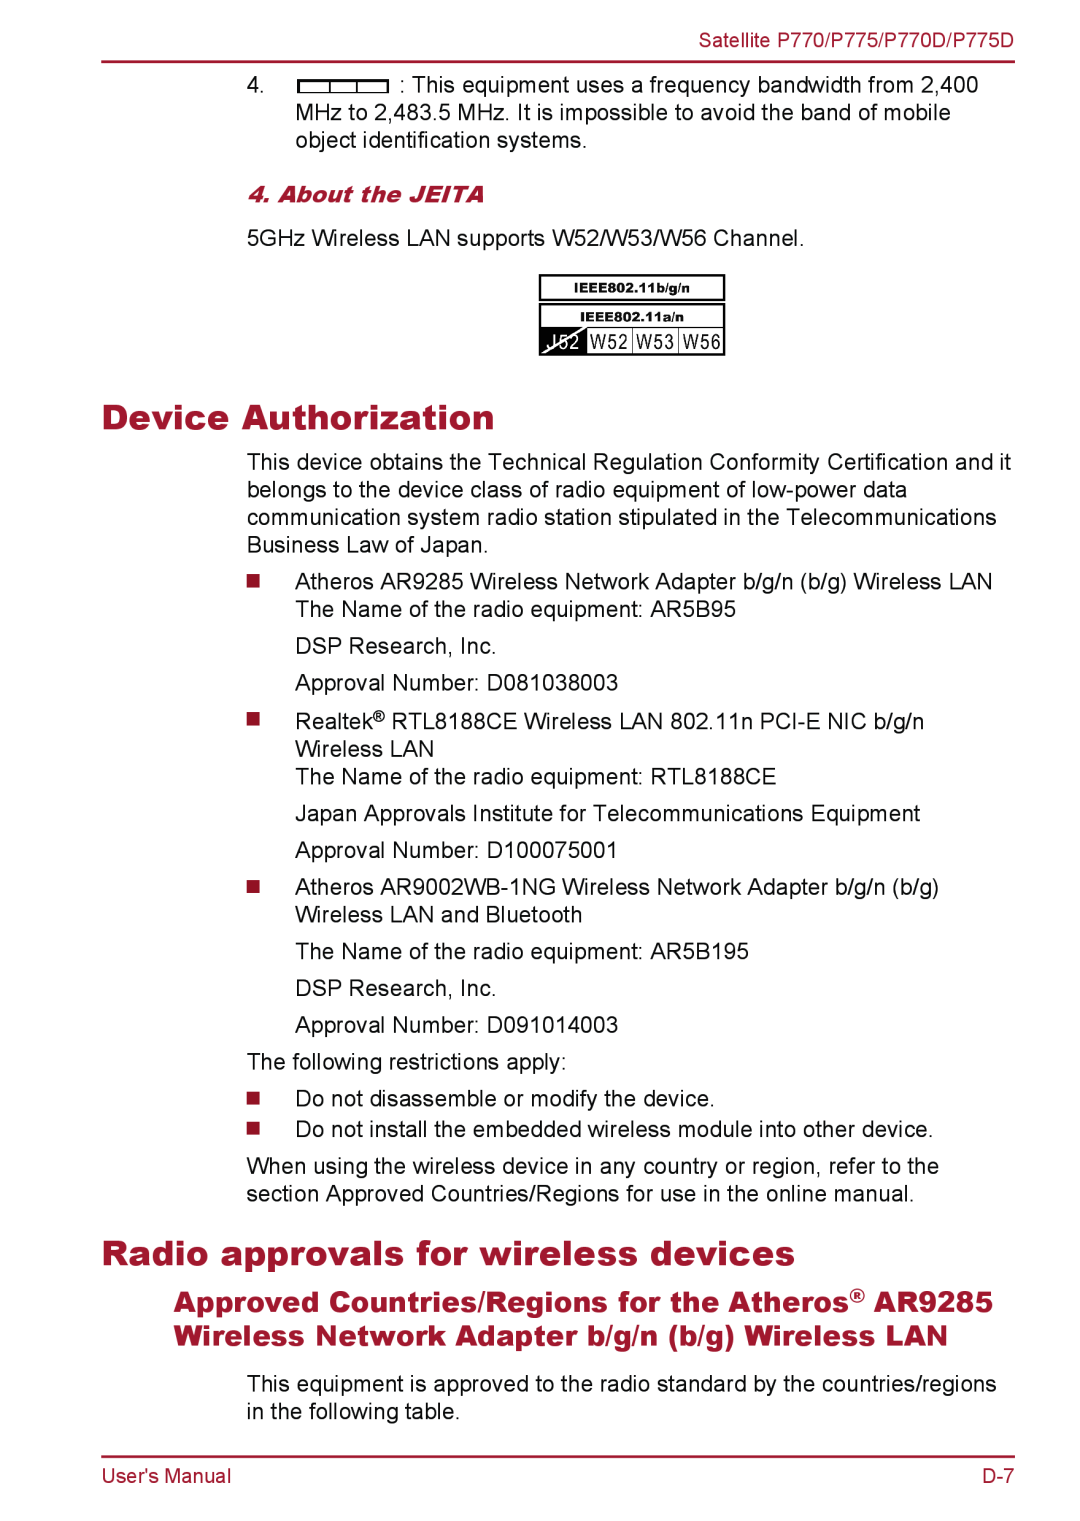 Toshiba P770 user manual Device Authorization, Radio approvals for wireless devices, About the JEITA 